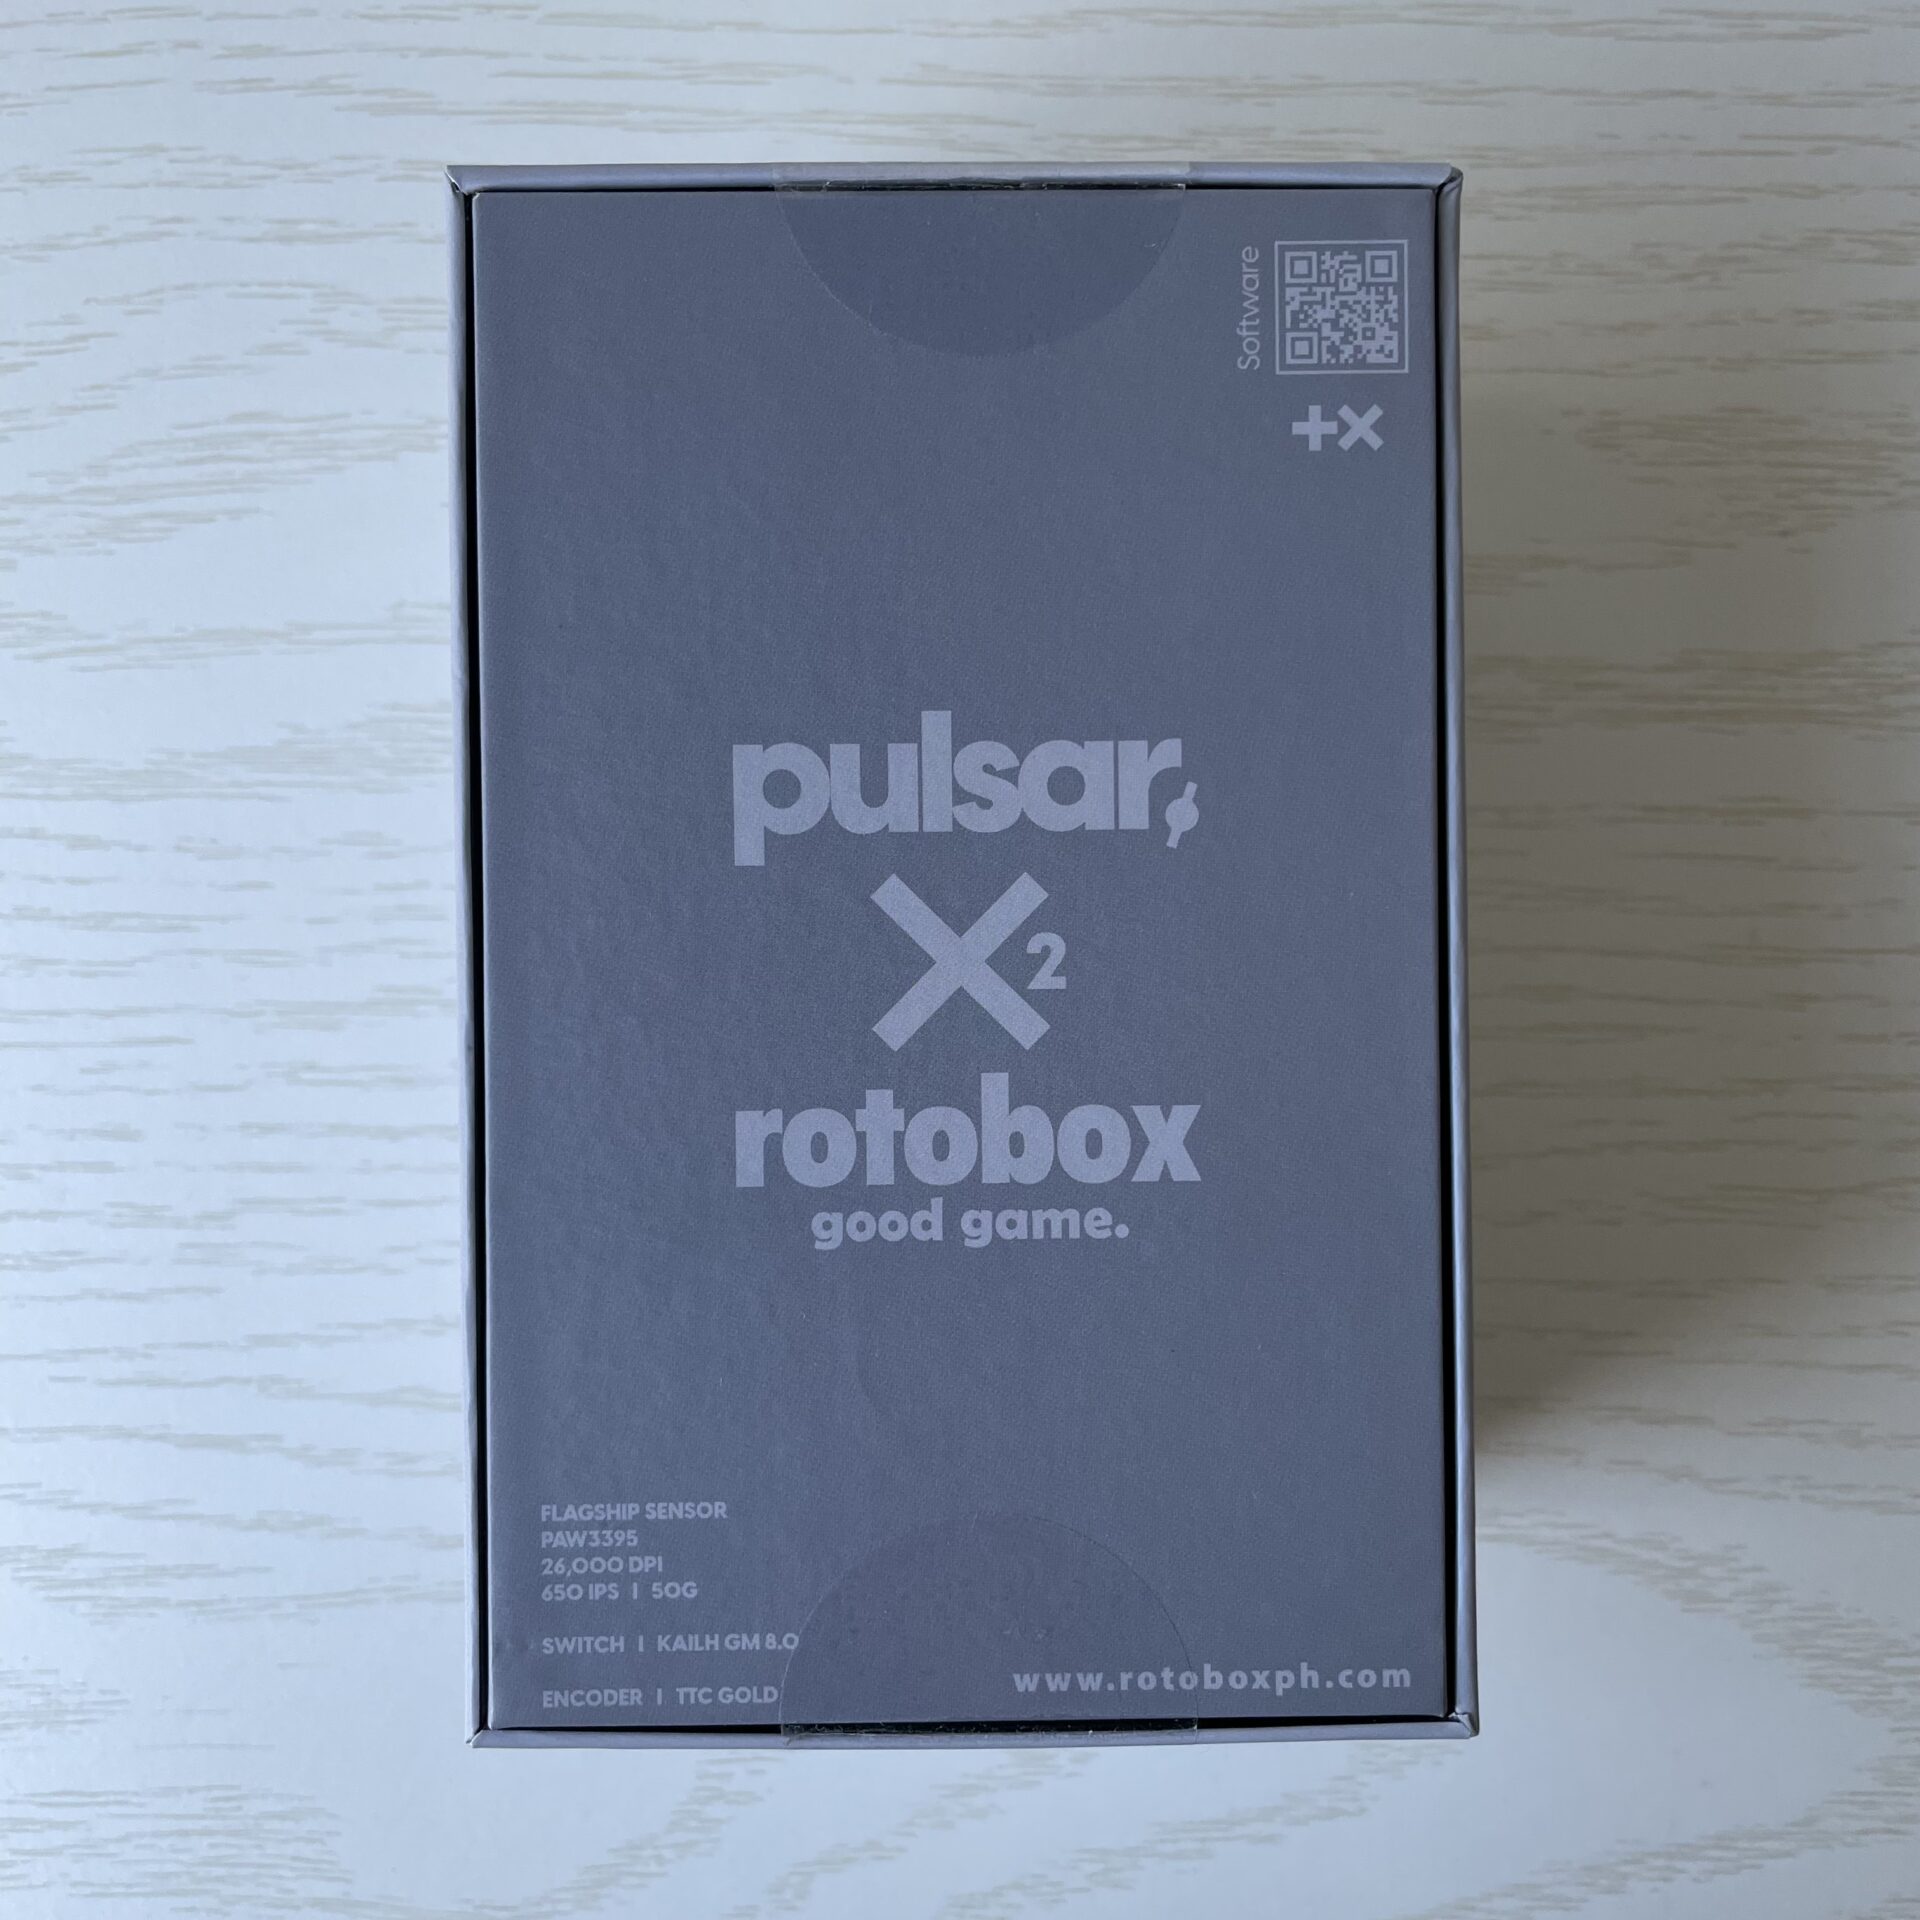 Pulsar X2 mini Wireless gaming mouse rotobox edition package2